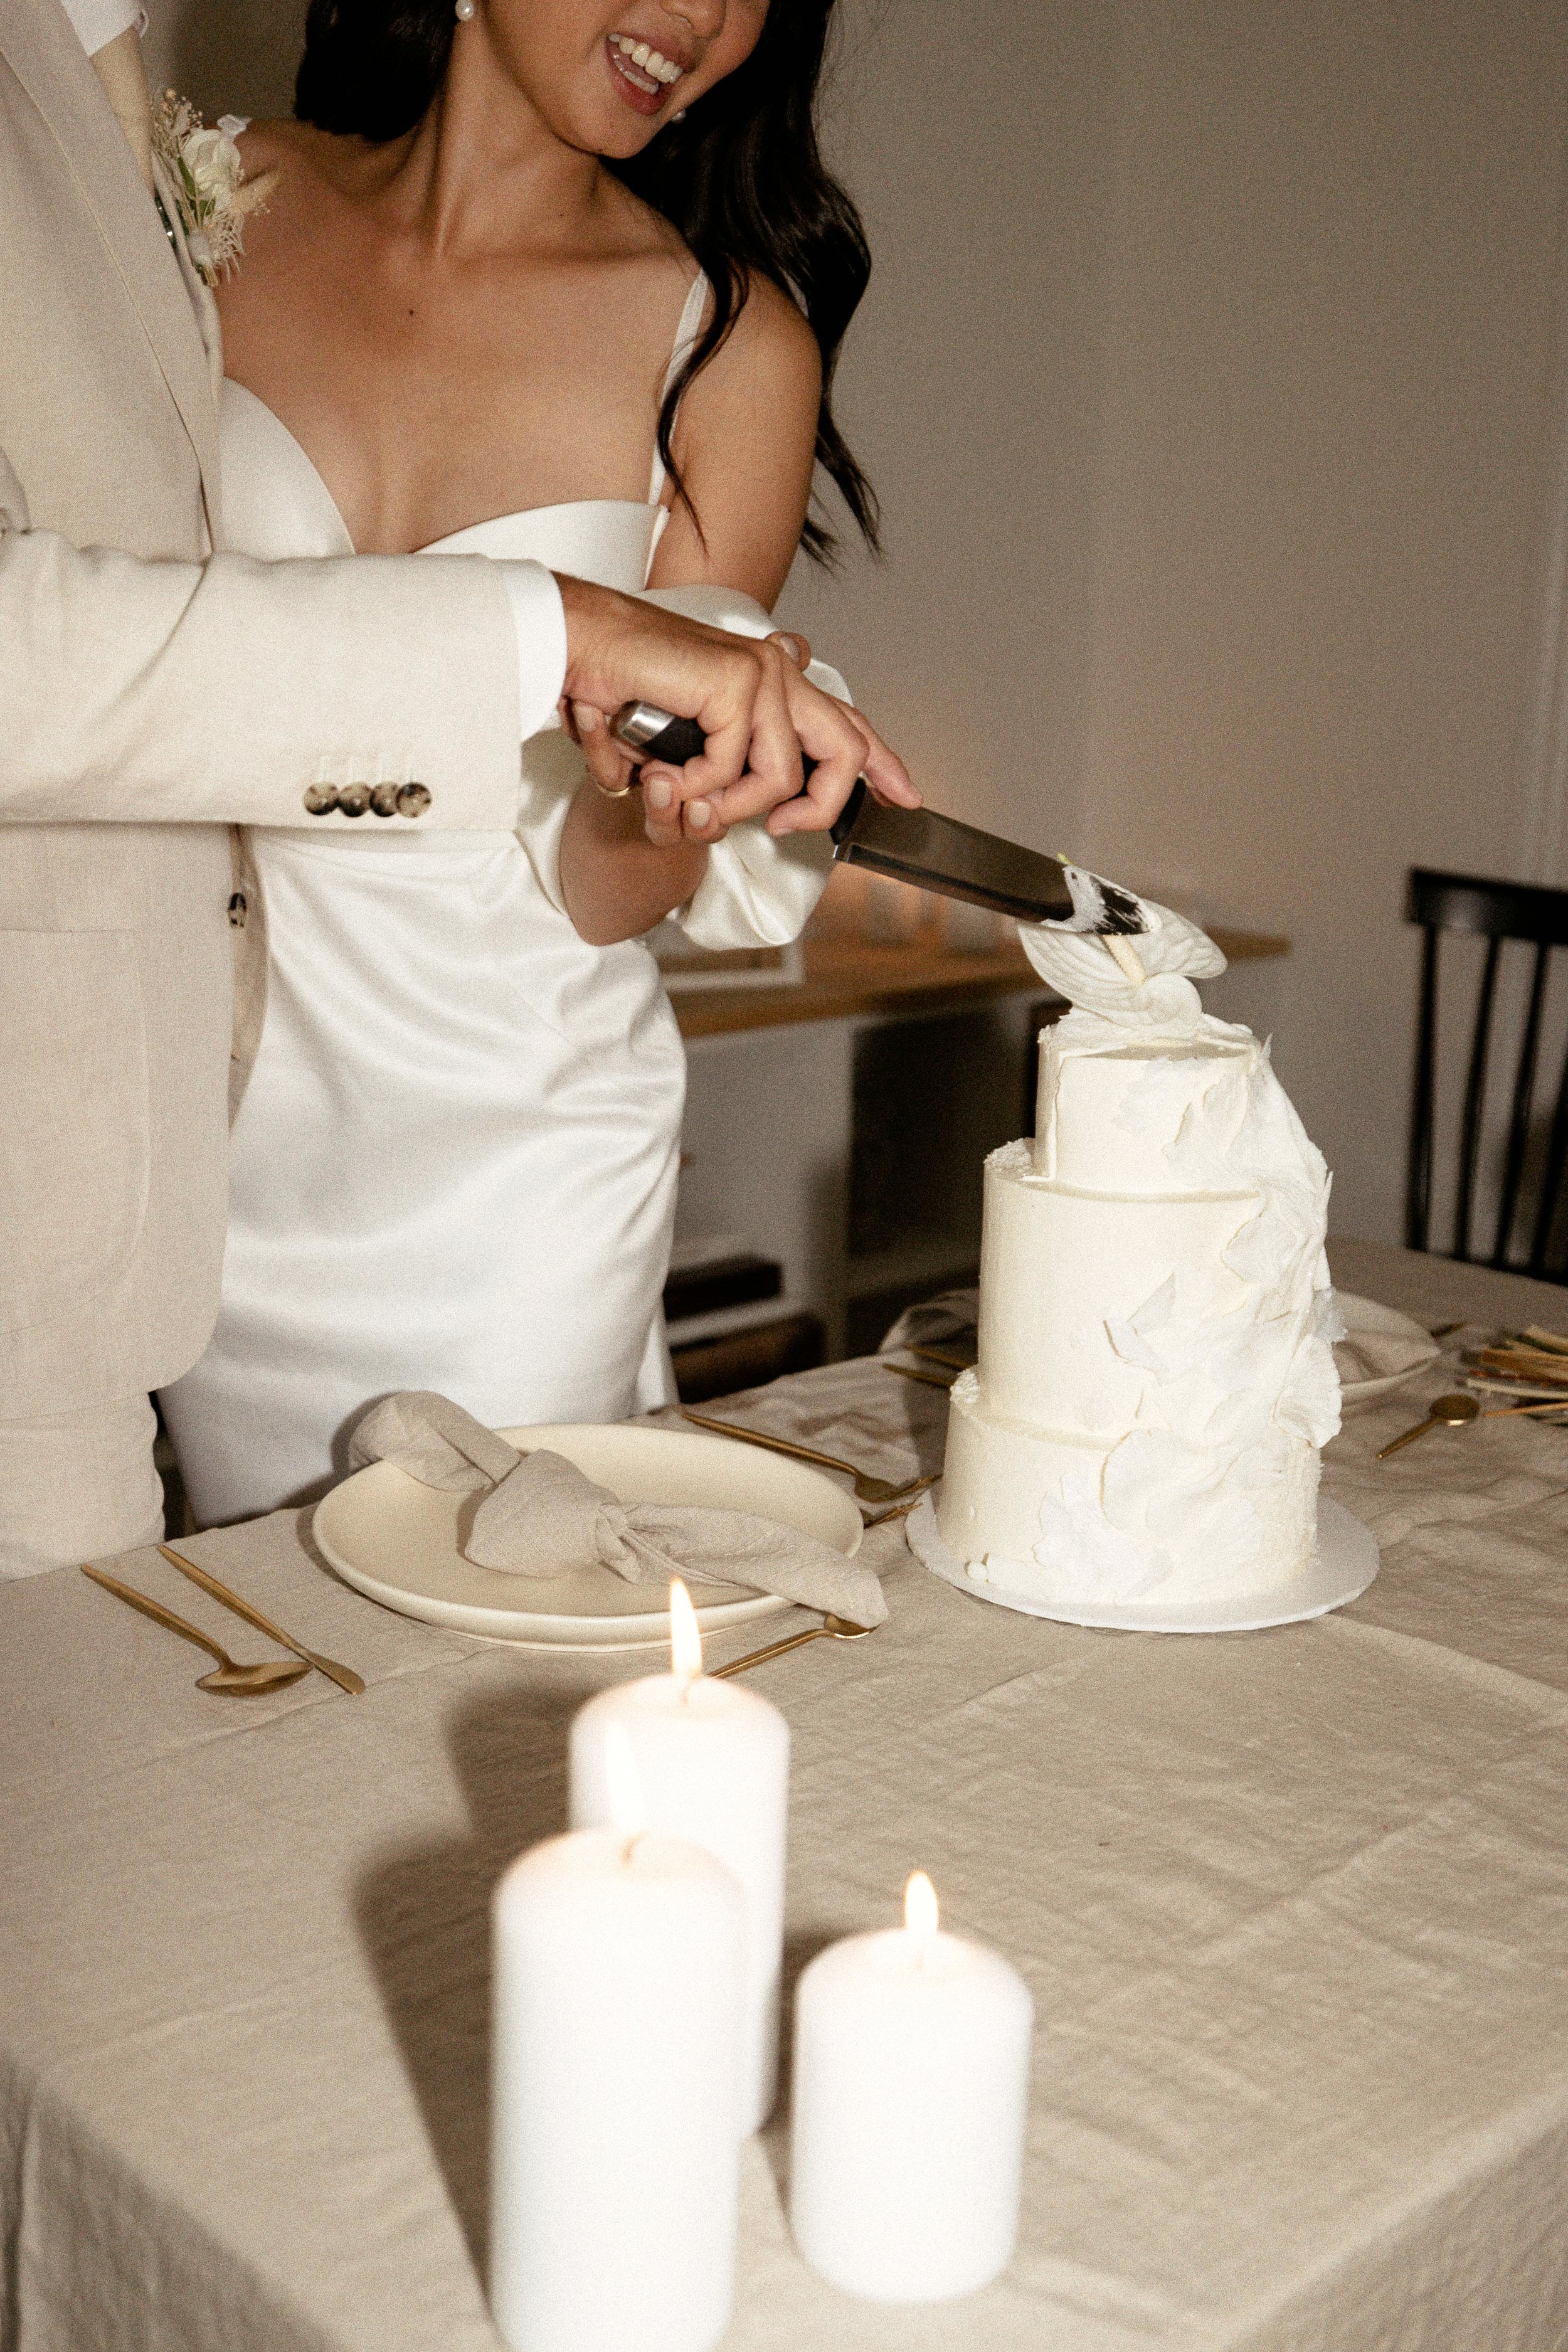 bride and groom celebrating their elopement - cake cutting ceremony 